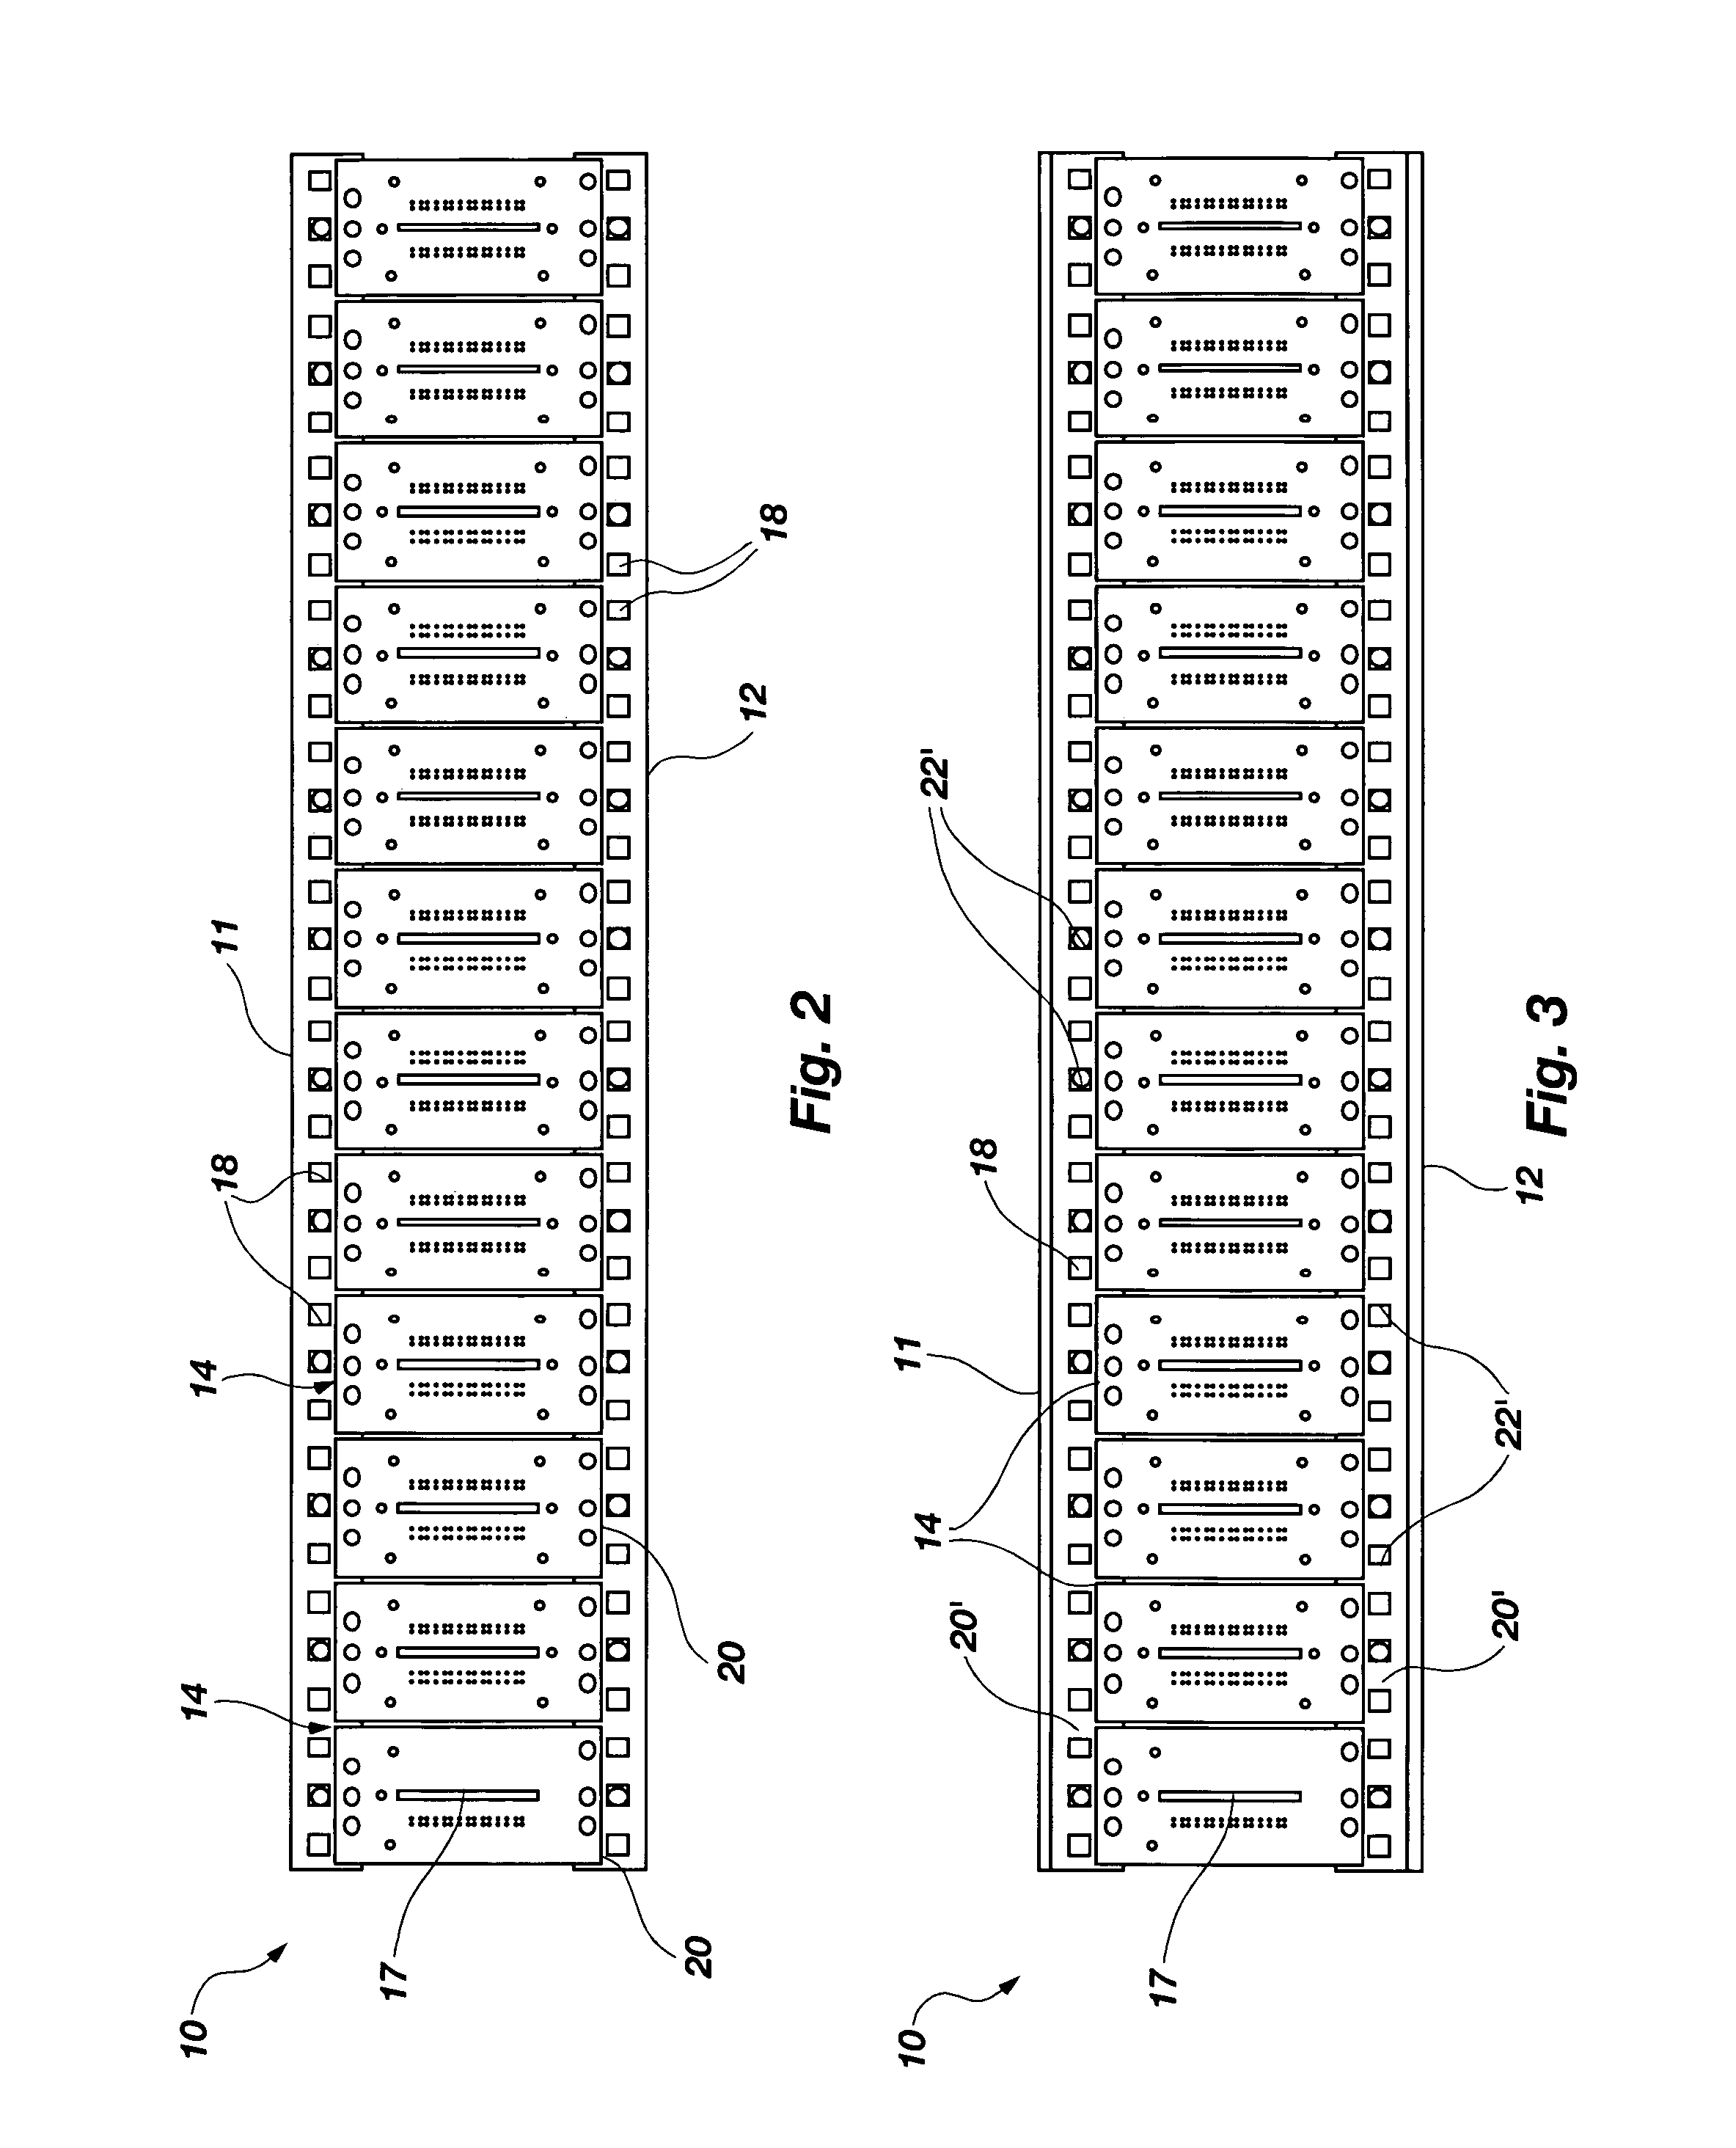 Tape stiffener, semiconductor device component assemblies including same, and stereolithographic methods for fabricating same